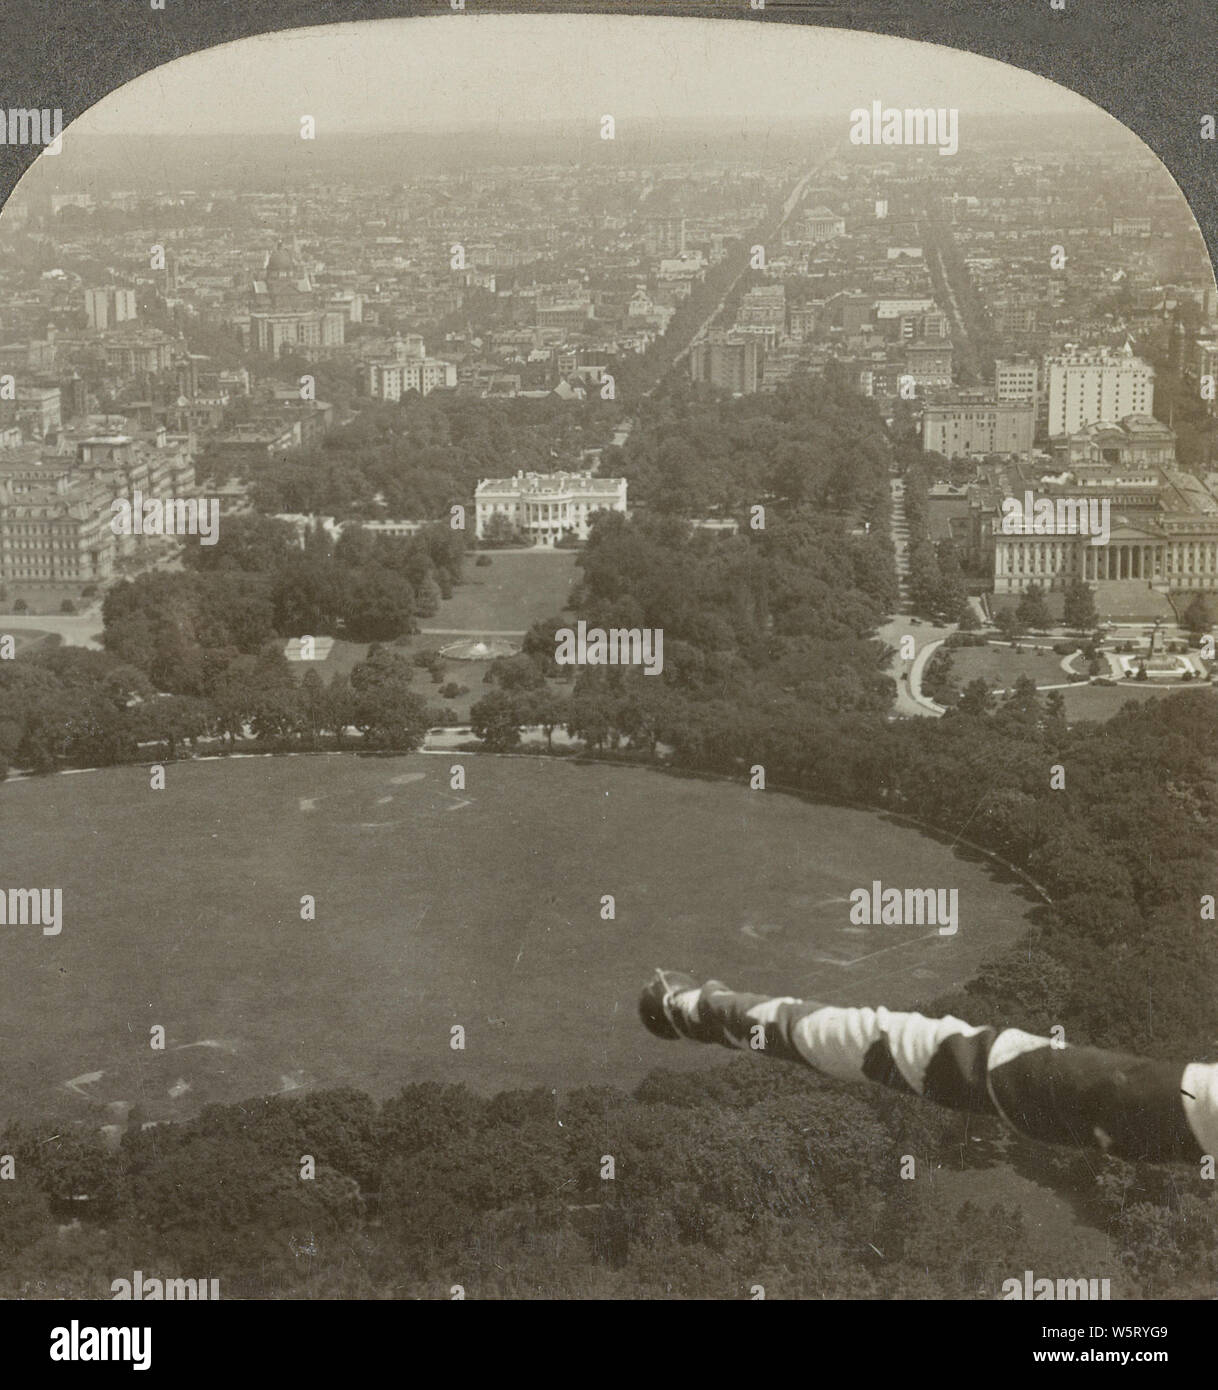 Looking North from Washington Monument toward the White House, Washington, D. C. in 1928. The White House is the official residence and workplace of the president of the United States. It is located at 1600 Pennsylvania Avenue NW in Washington, D.C. and has been the residence of every U.S. president since John Adams in 1800. Stock Photo